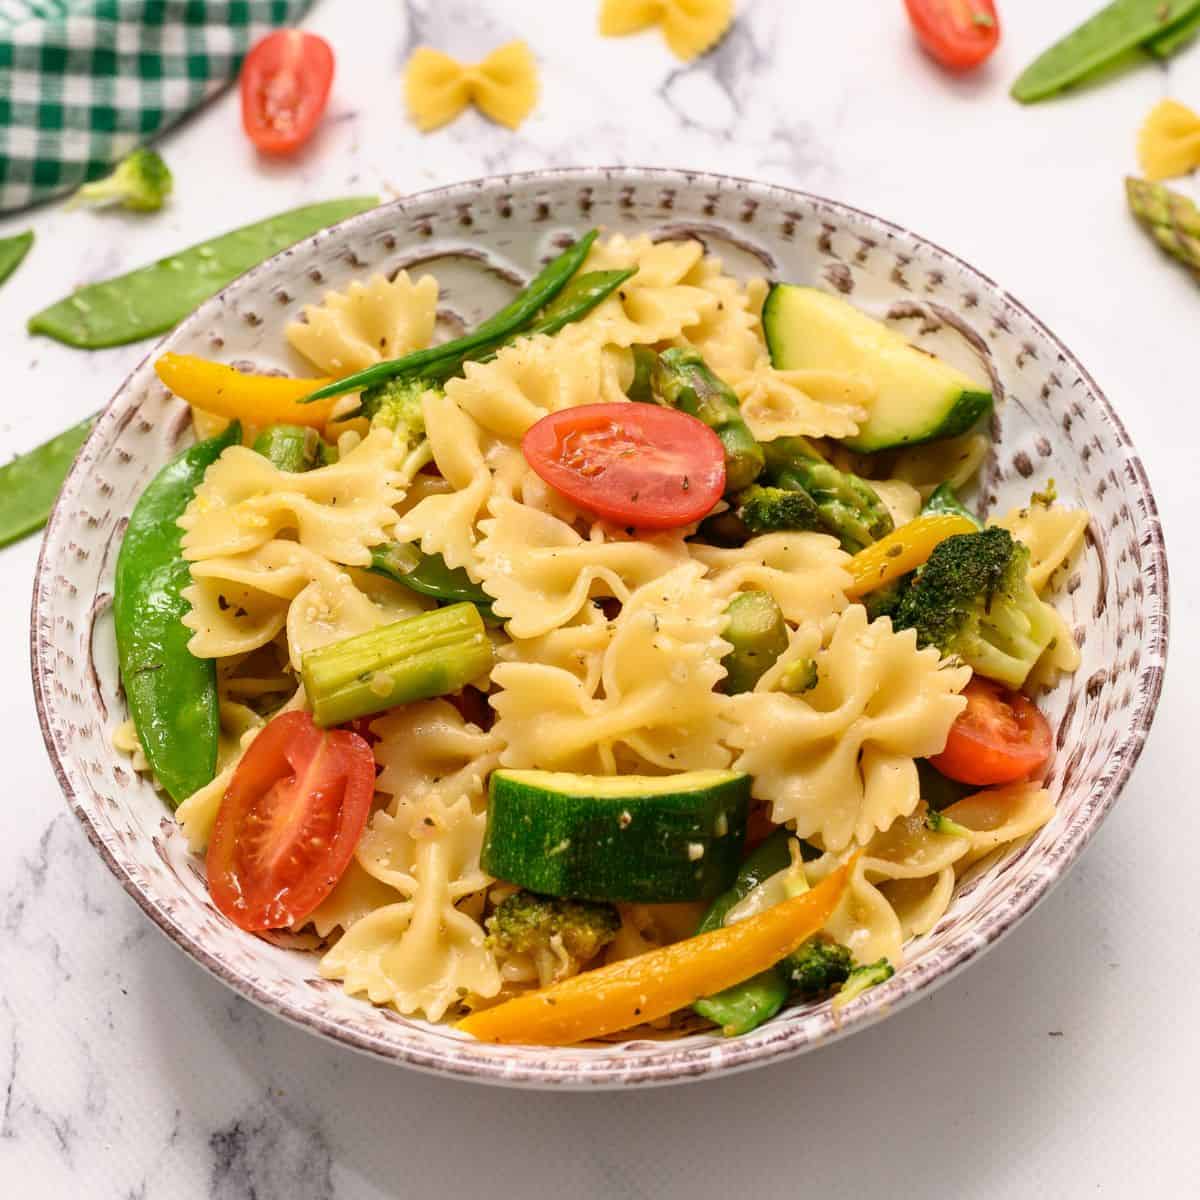 Bowl of pasta with fresh spring vegetables.